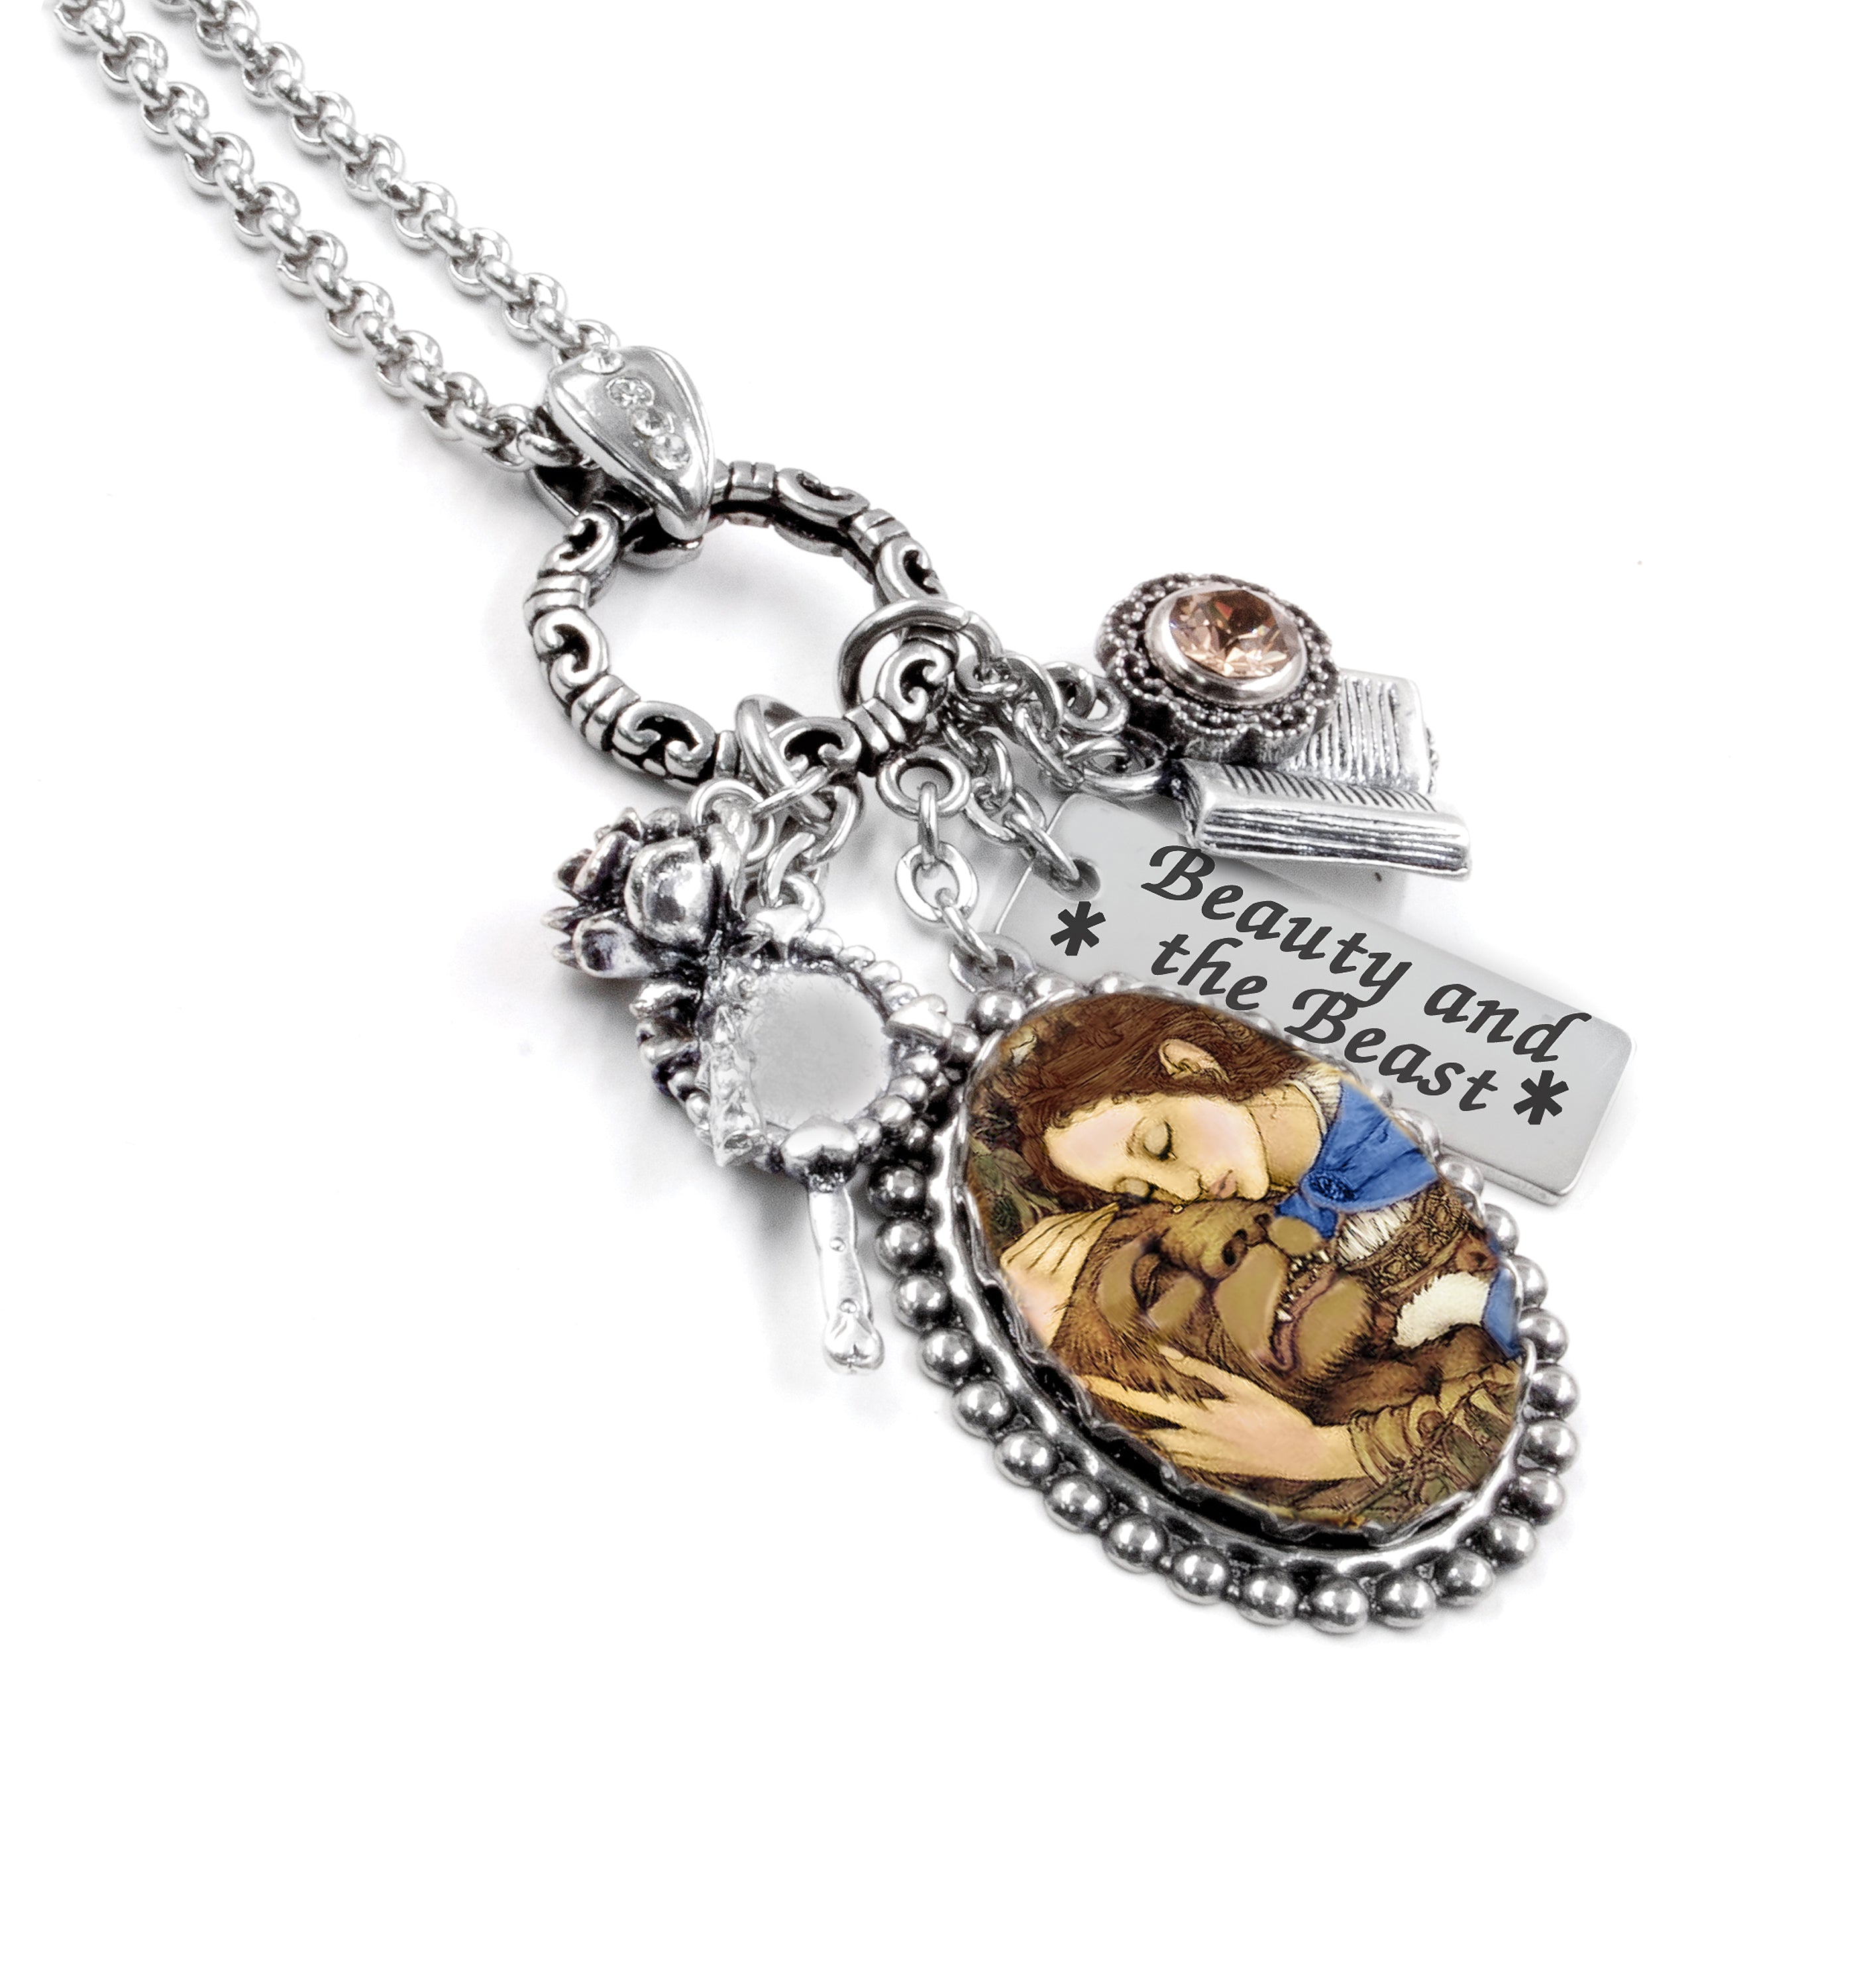 Beauty and The Beast + Stainless Steel + Necklaces + 22 Inches + Women's + Necklaces